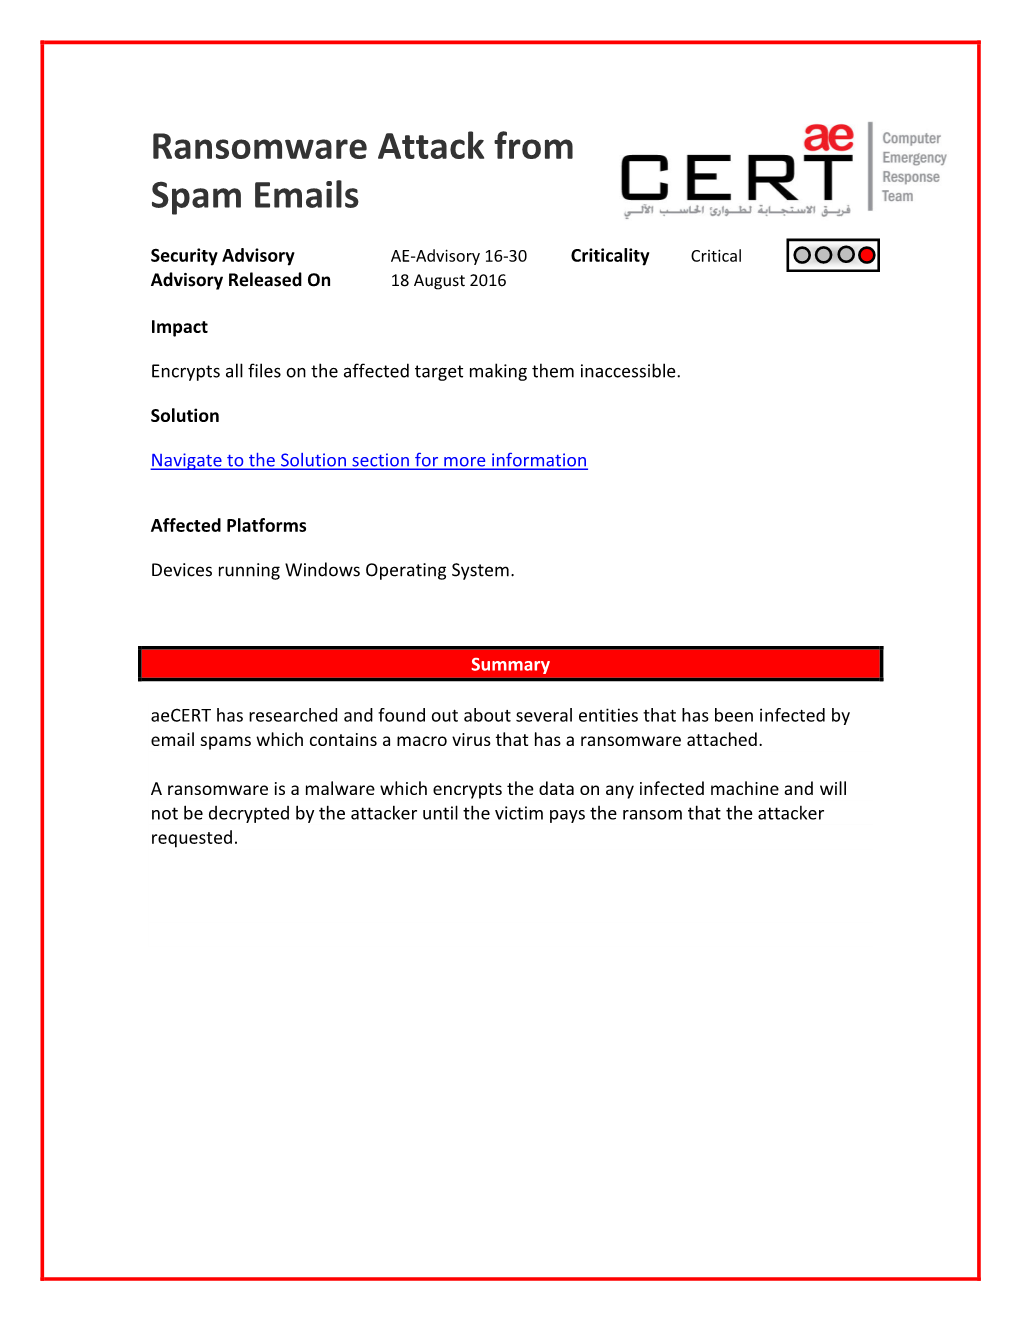 Ransomware Attack from Spam Emails